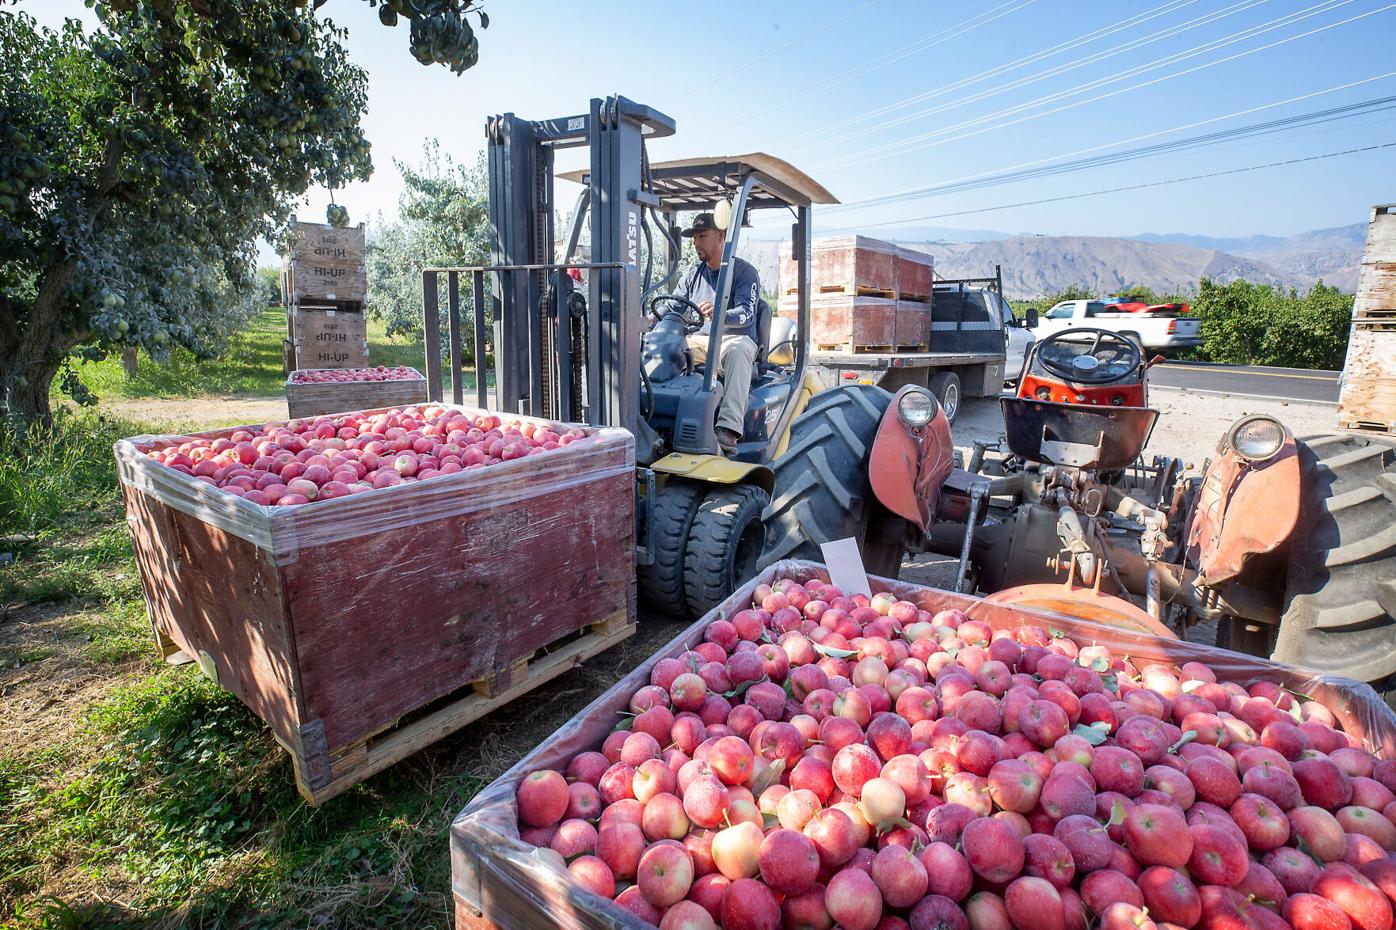 Bagged apples an opportunity out of Washington